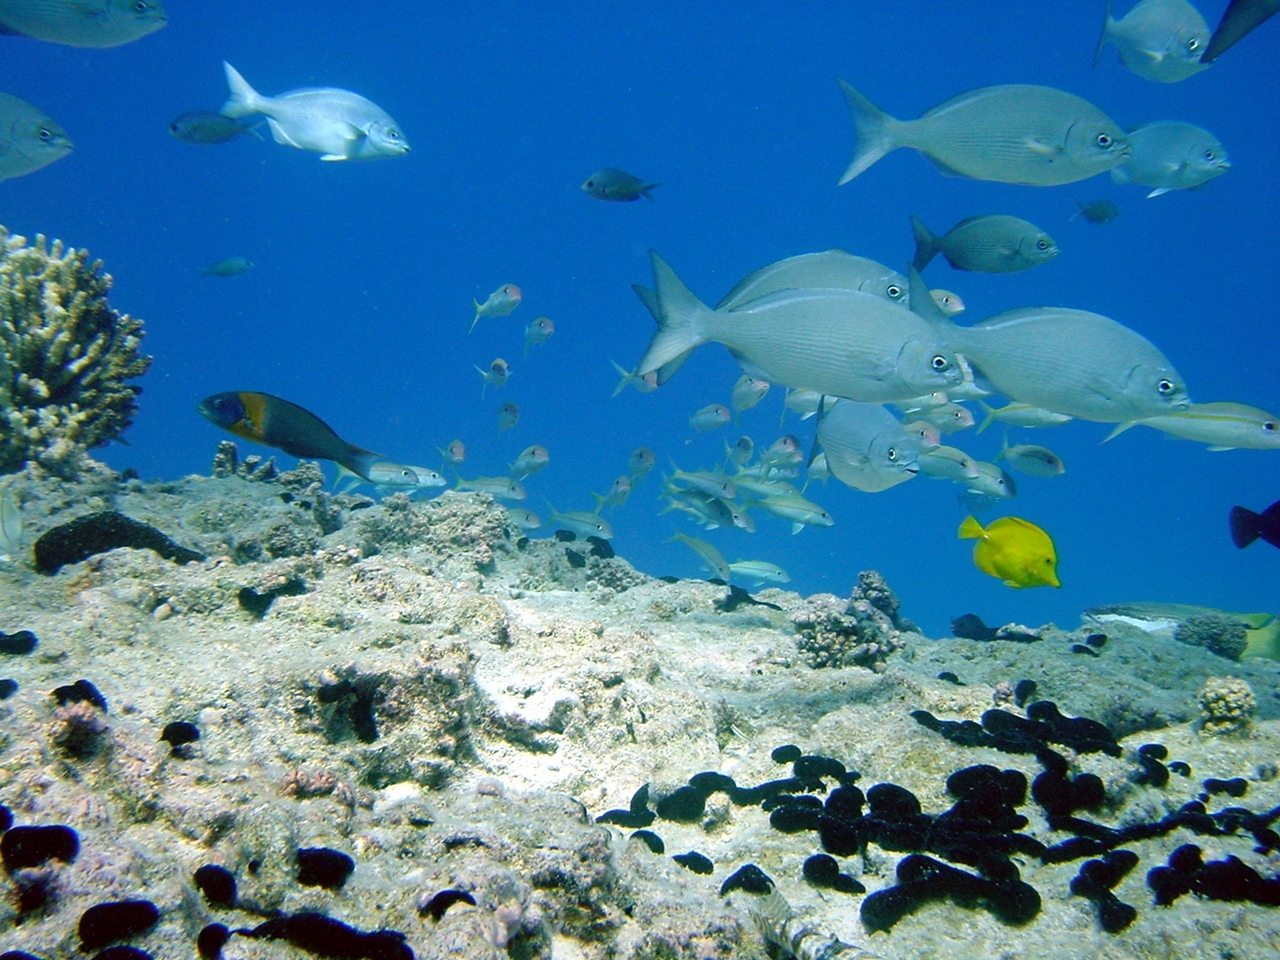 Reef scene with chubs (Kyphosus bigibbus) in foreground